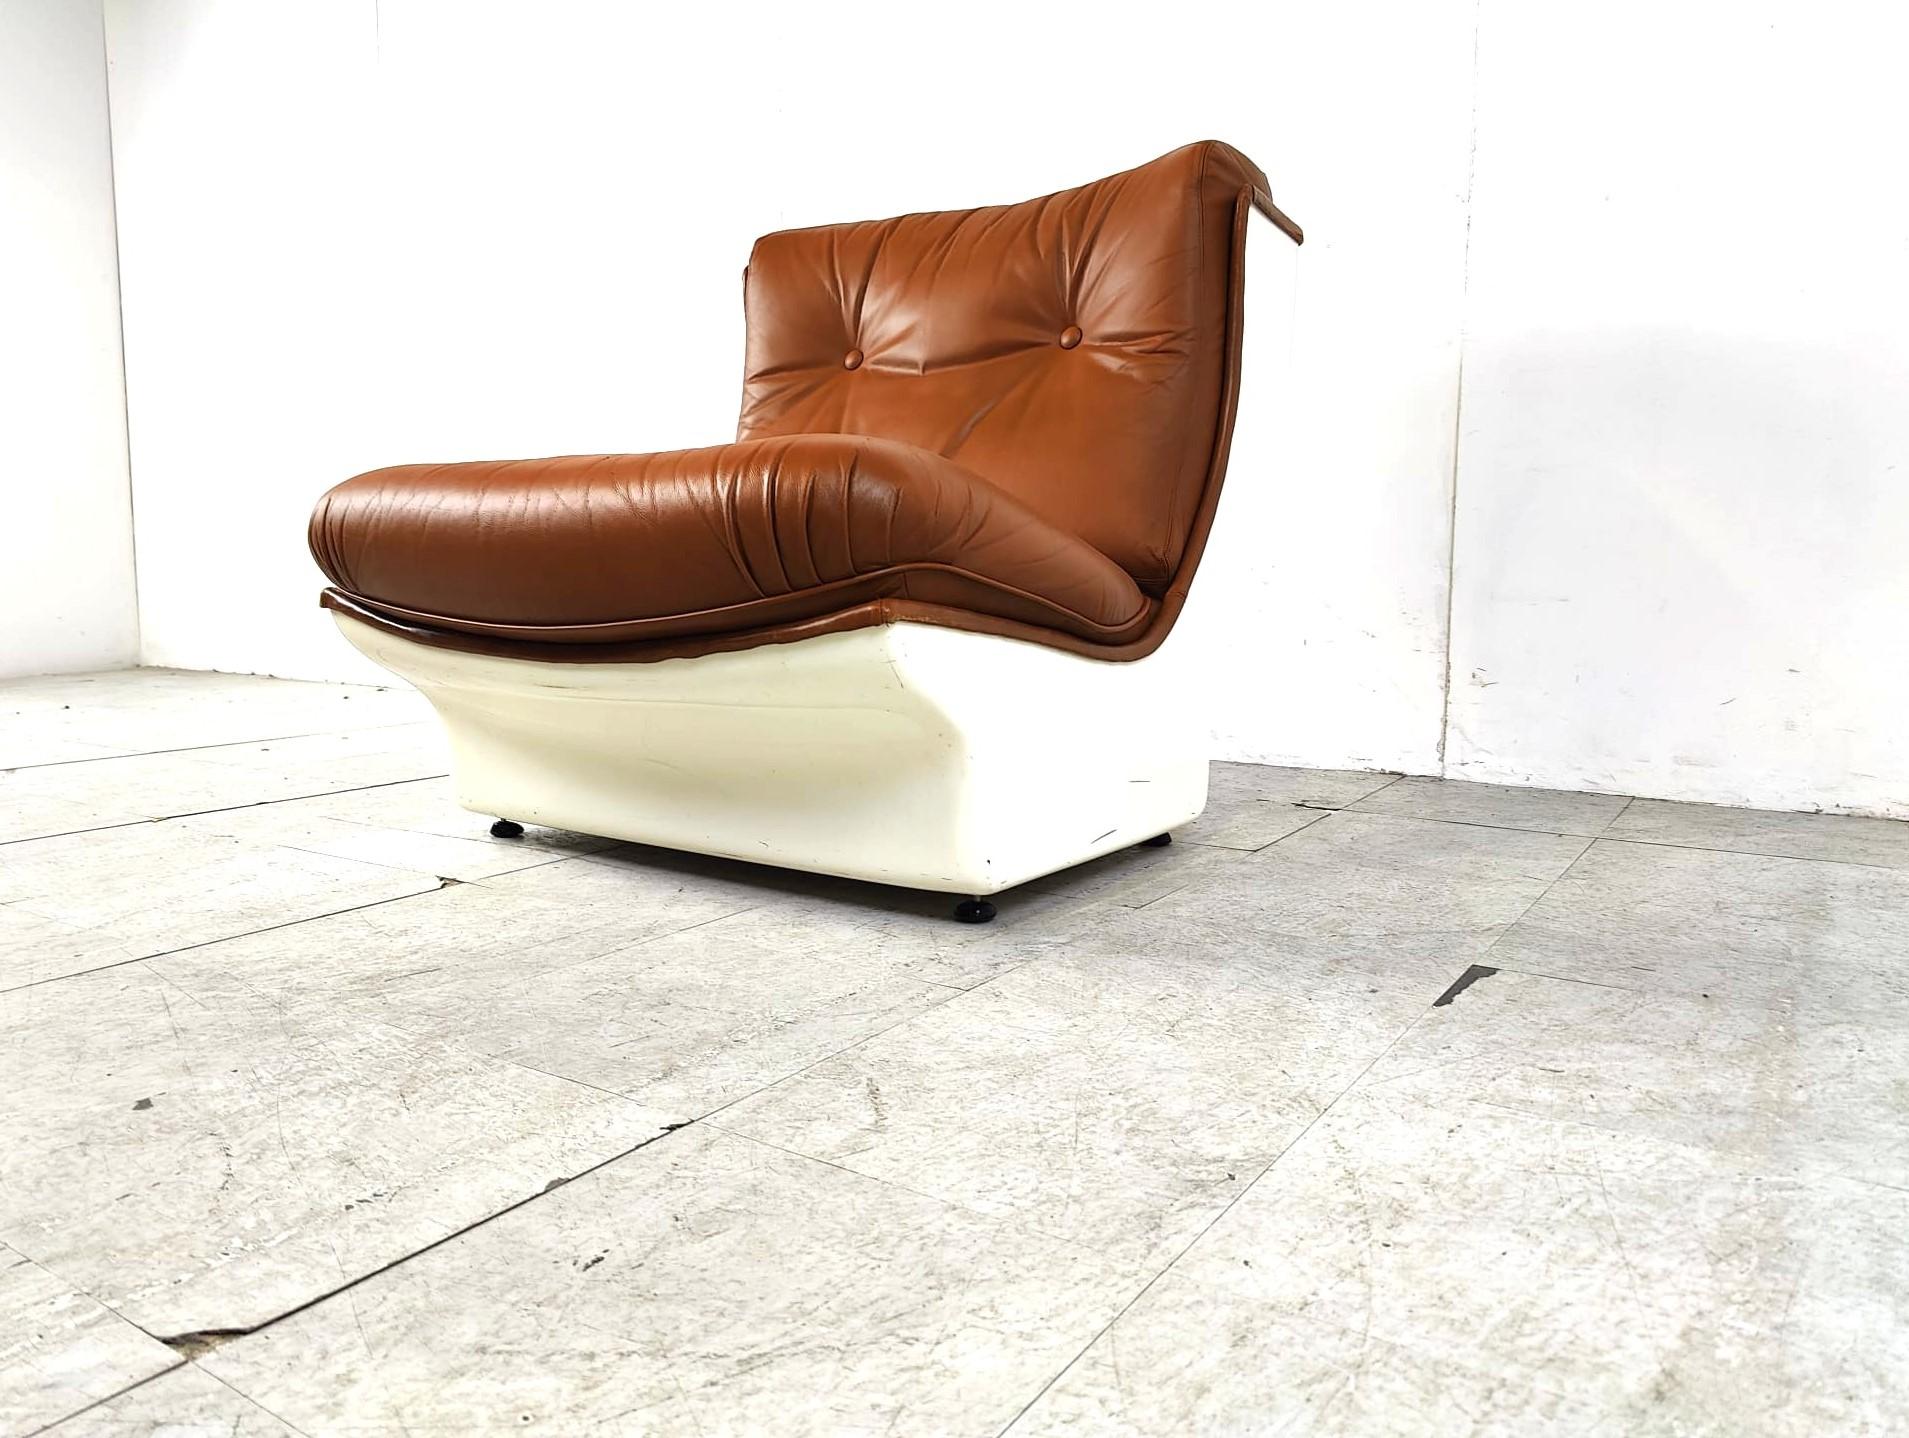 Space age leather lounge chair by Airborne international, 1970s For Sale 3